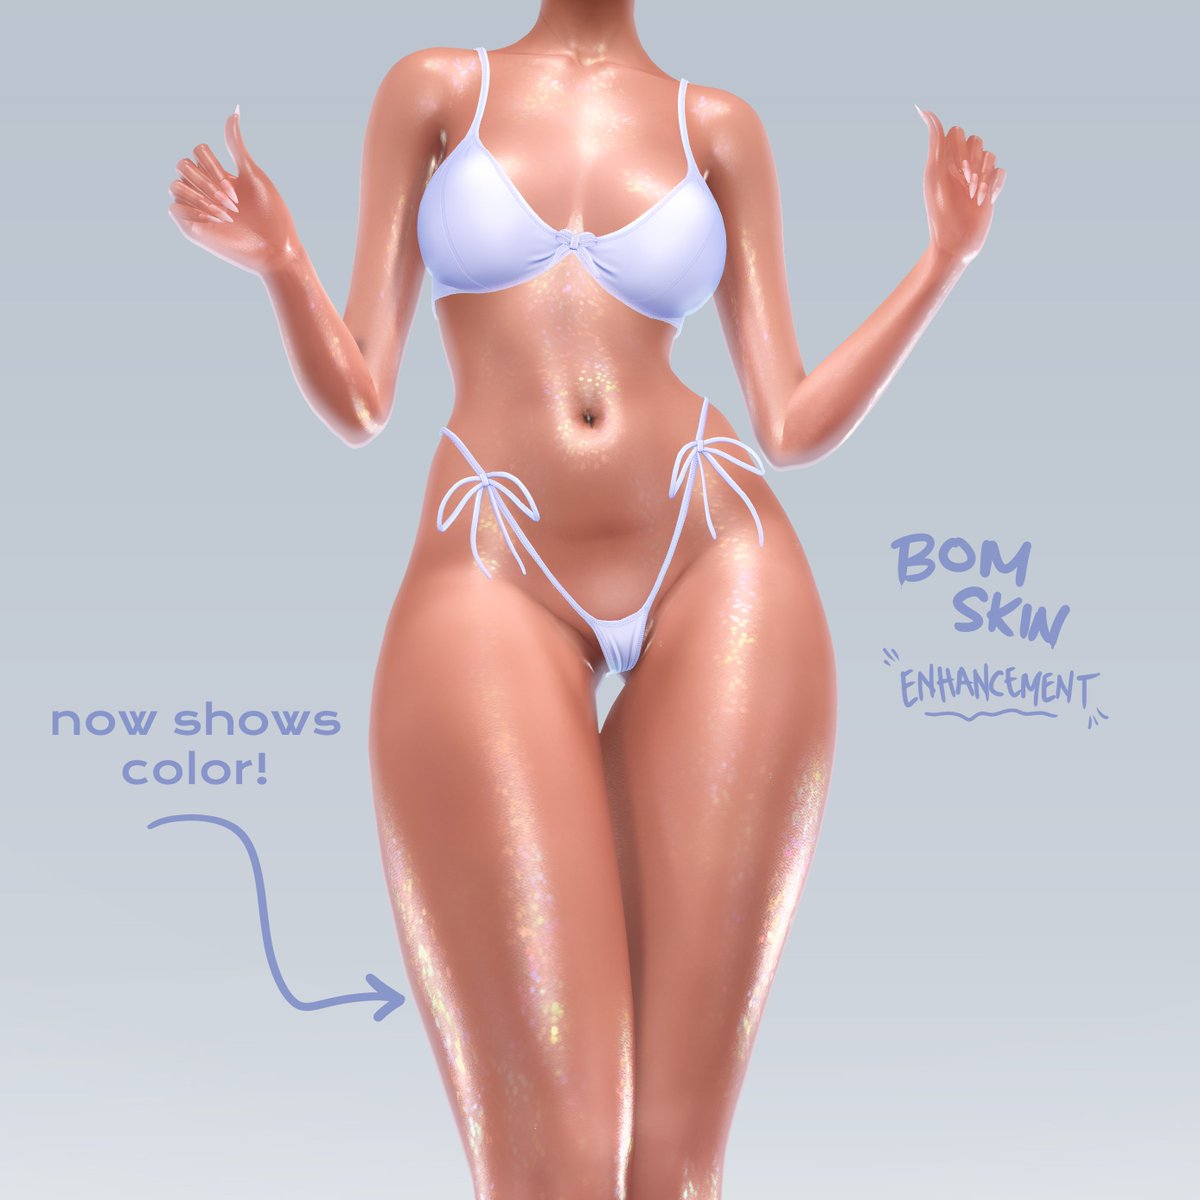 For Fifty Linden Fridays, 'Birthday Suit FX' Shine is out and for 50L <3. Legacy got an update to apply to the BOM (core layer) so it will now display colors!
maps.secondlife.com/secondlife/The…